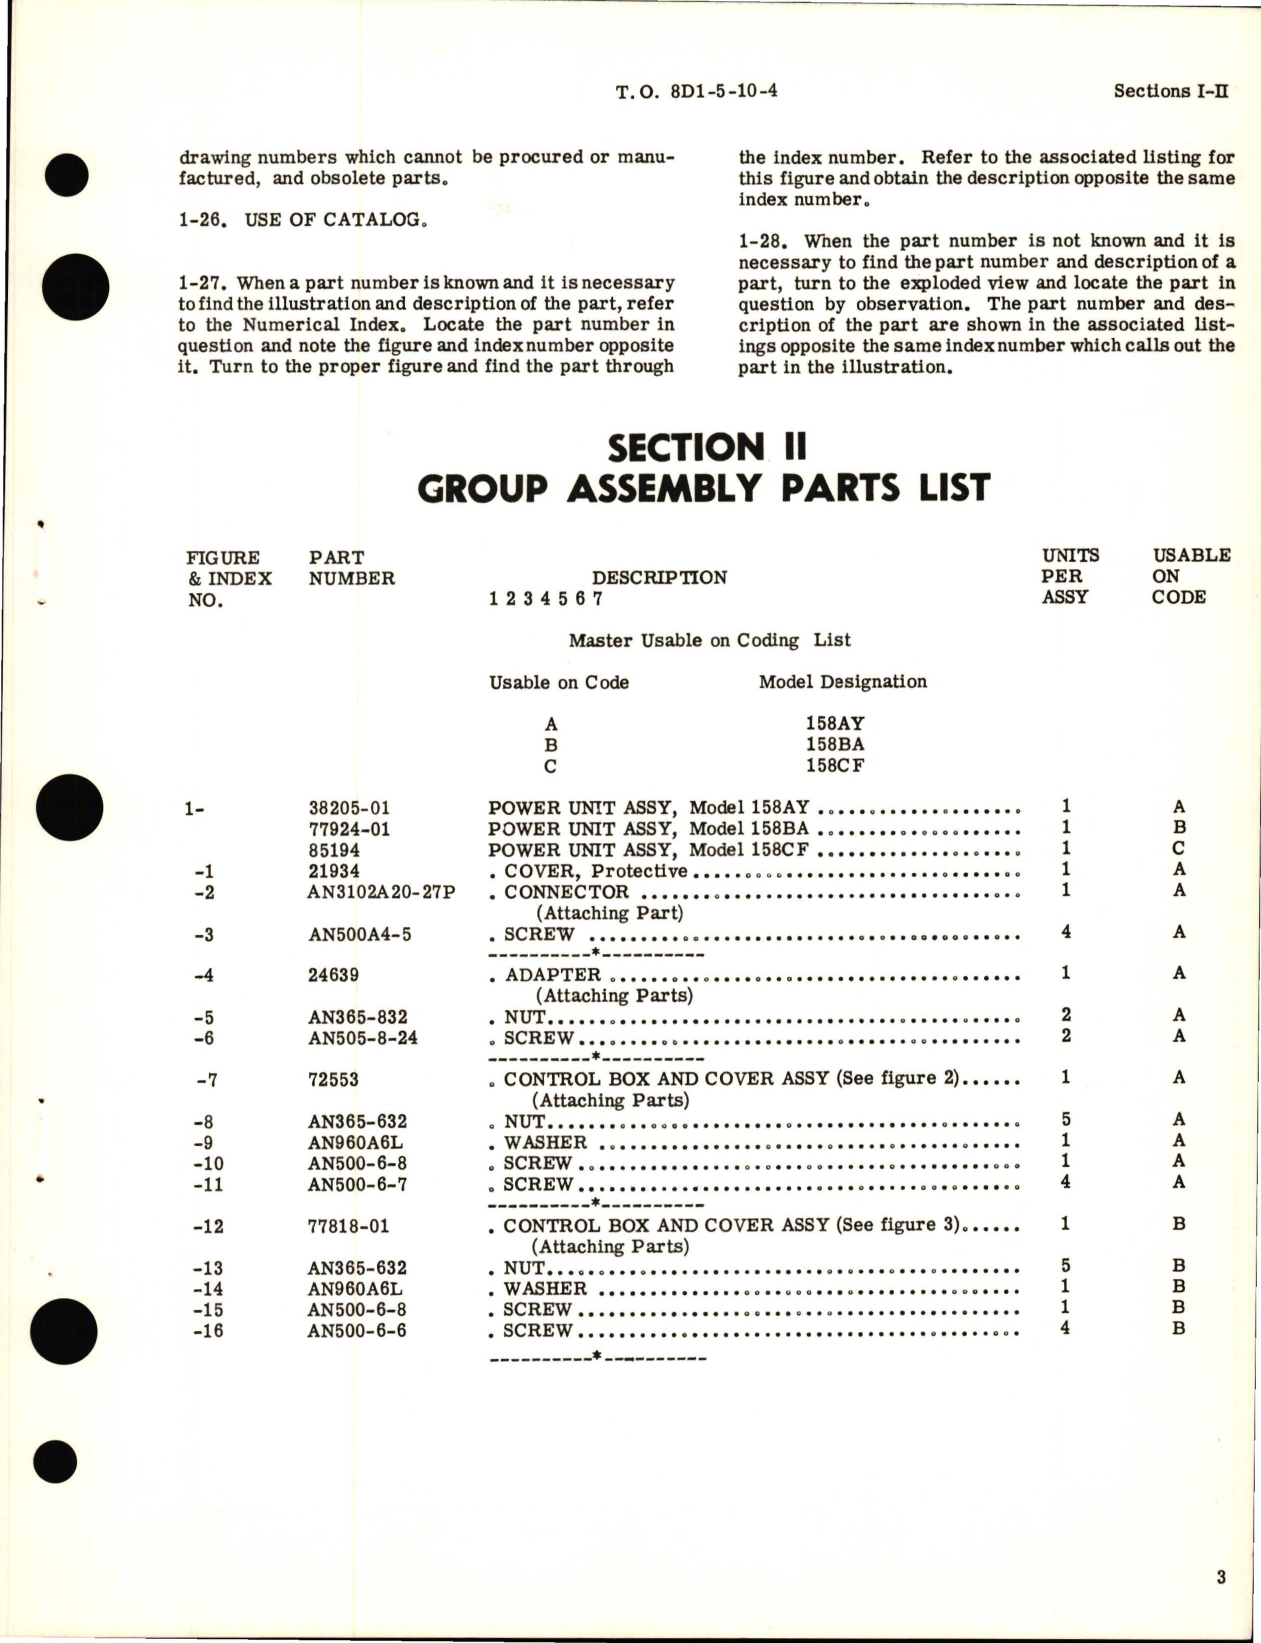 Sample page 5 from AirCorps Library document: Illustrated Parts Breakdown for Power Unit Assembly 158 Series